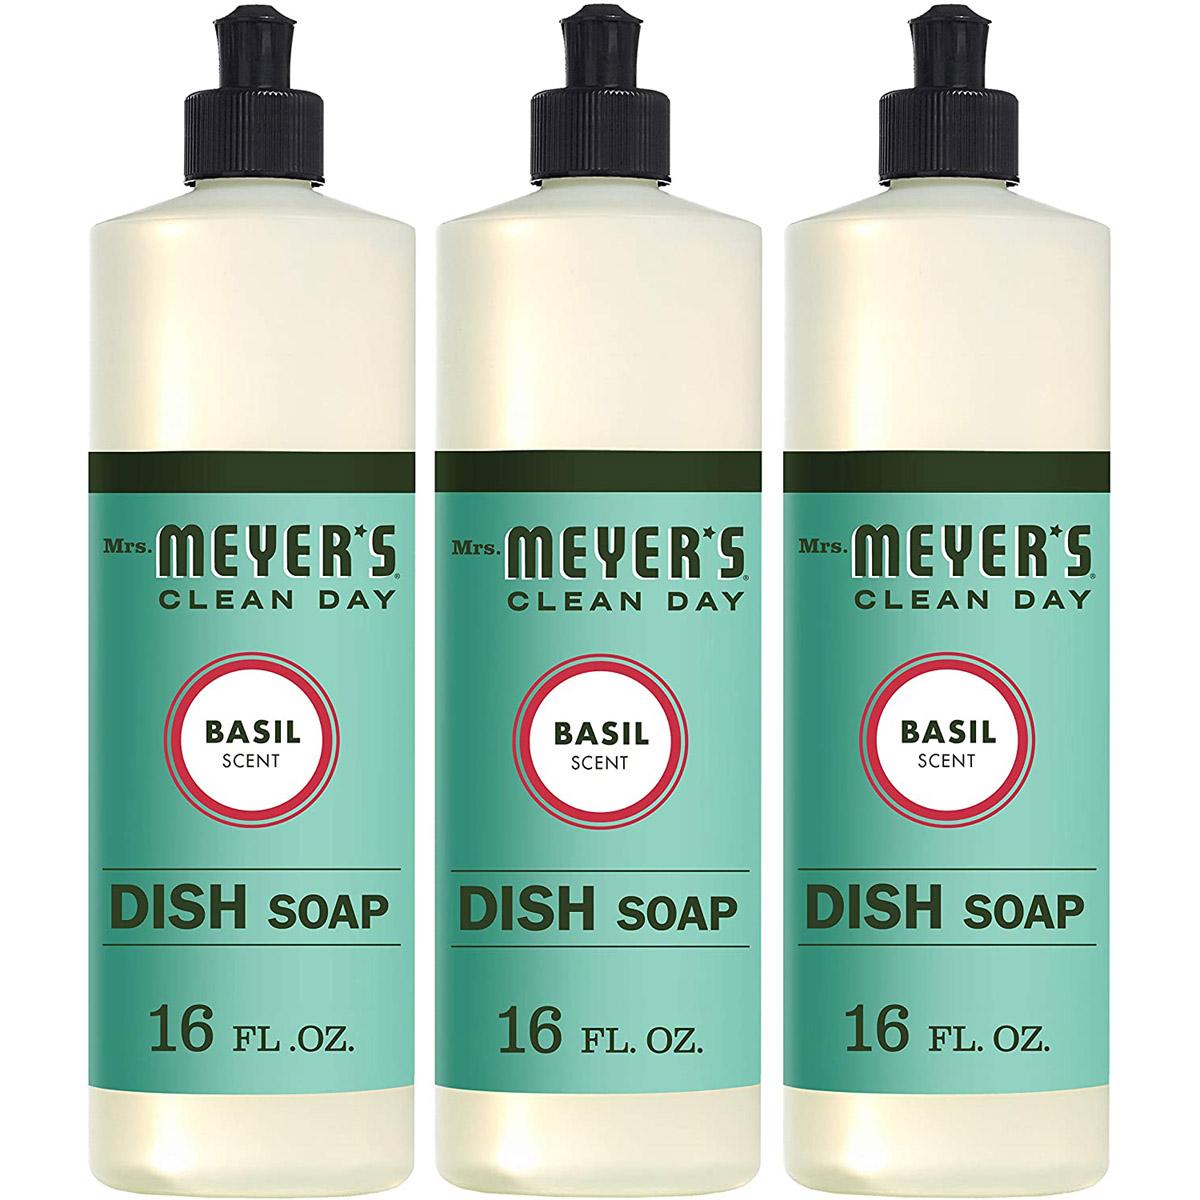 3 Mrs Meyers Clean Day Basil Liquid Dish Soap for $7.65 Shipped